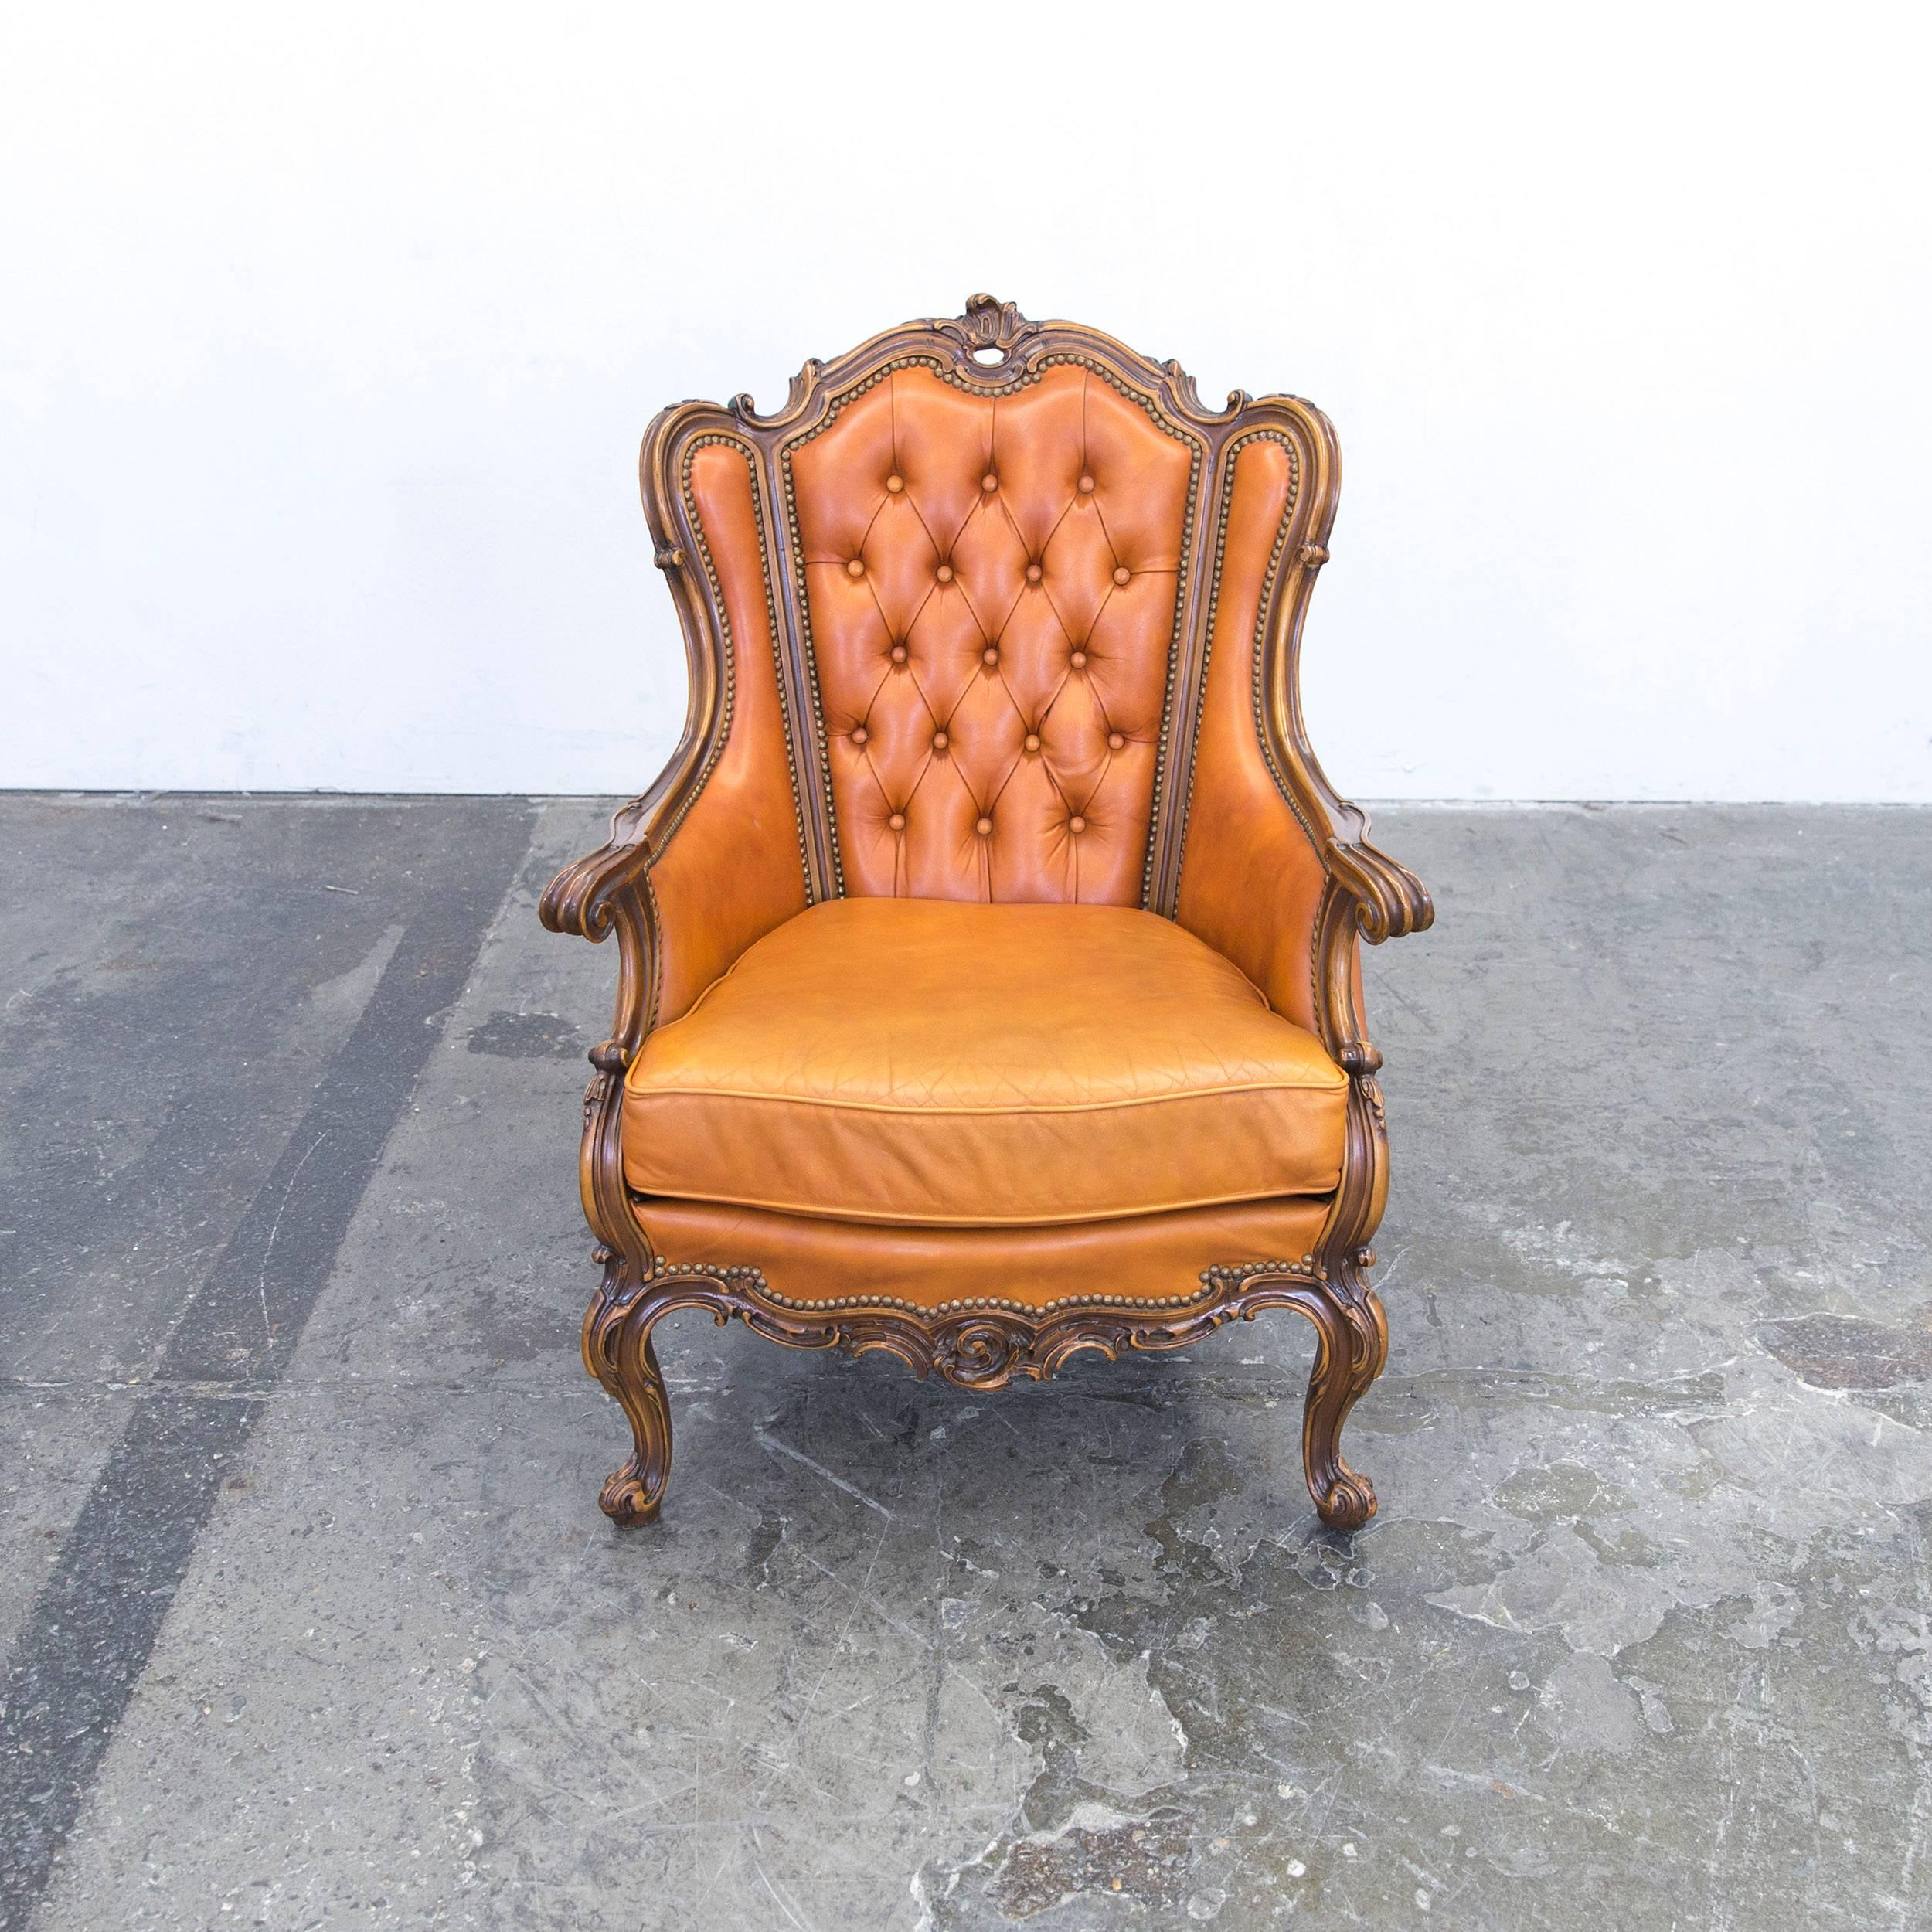 British Chesterfield Baroque Leather Armchair Cognac Brown Three-Seat Couch Wood Retro